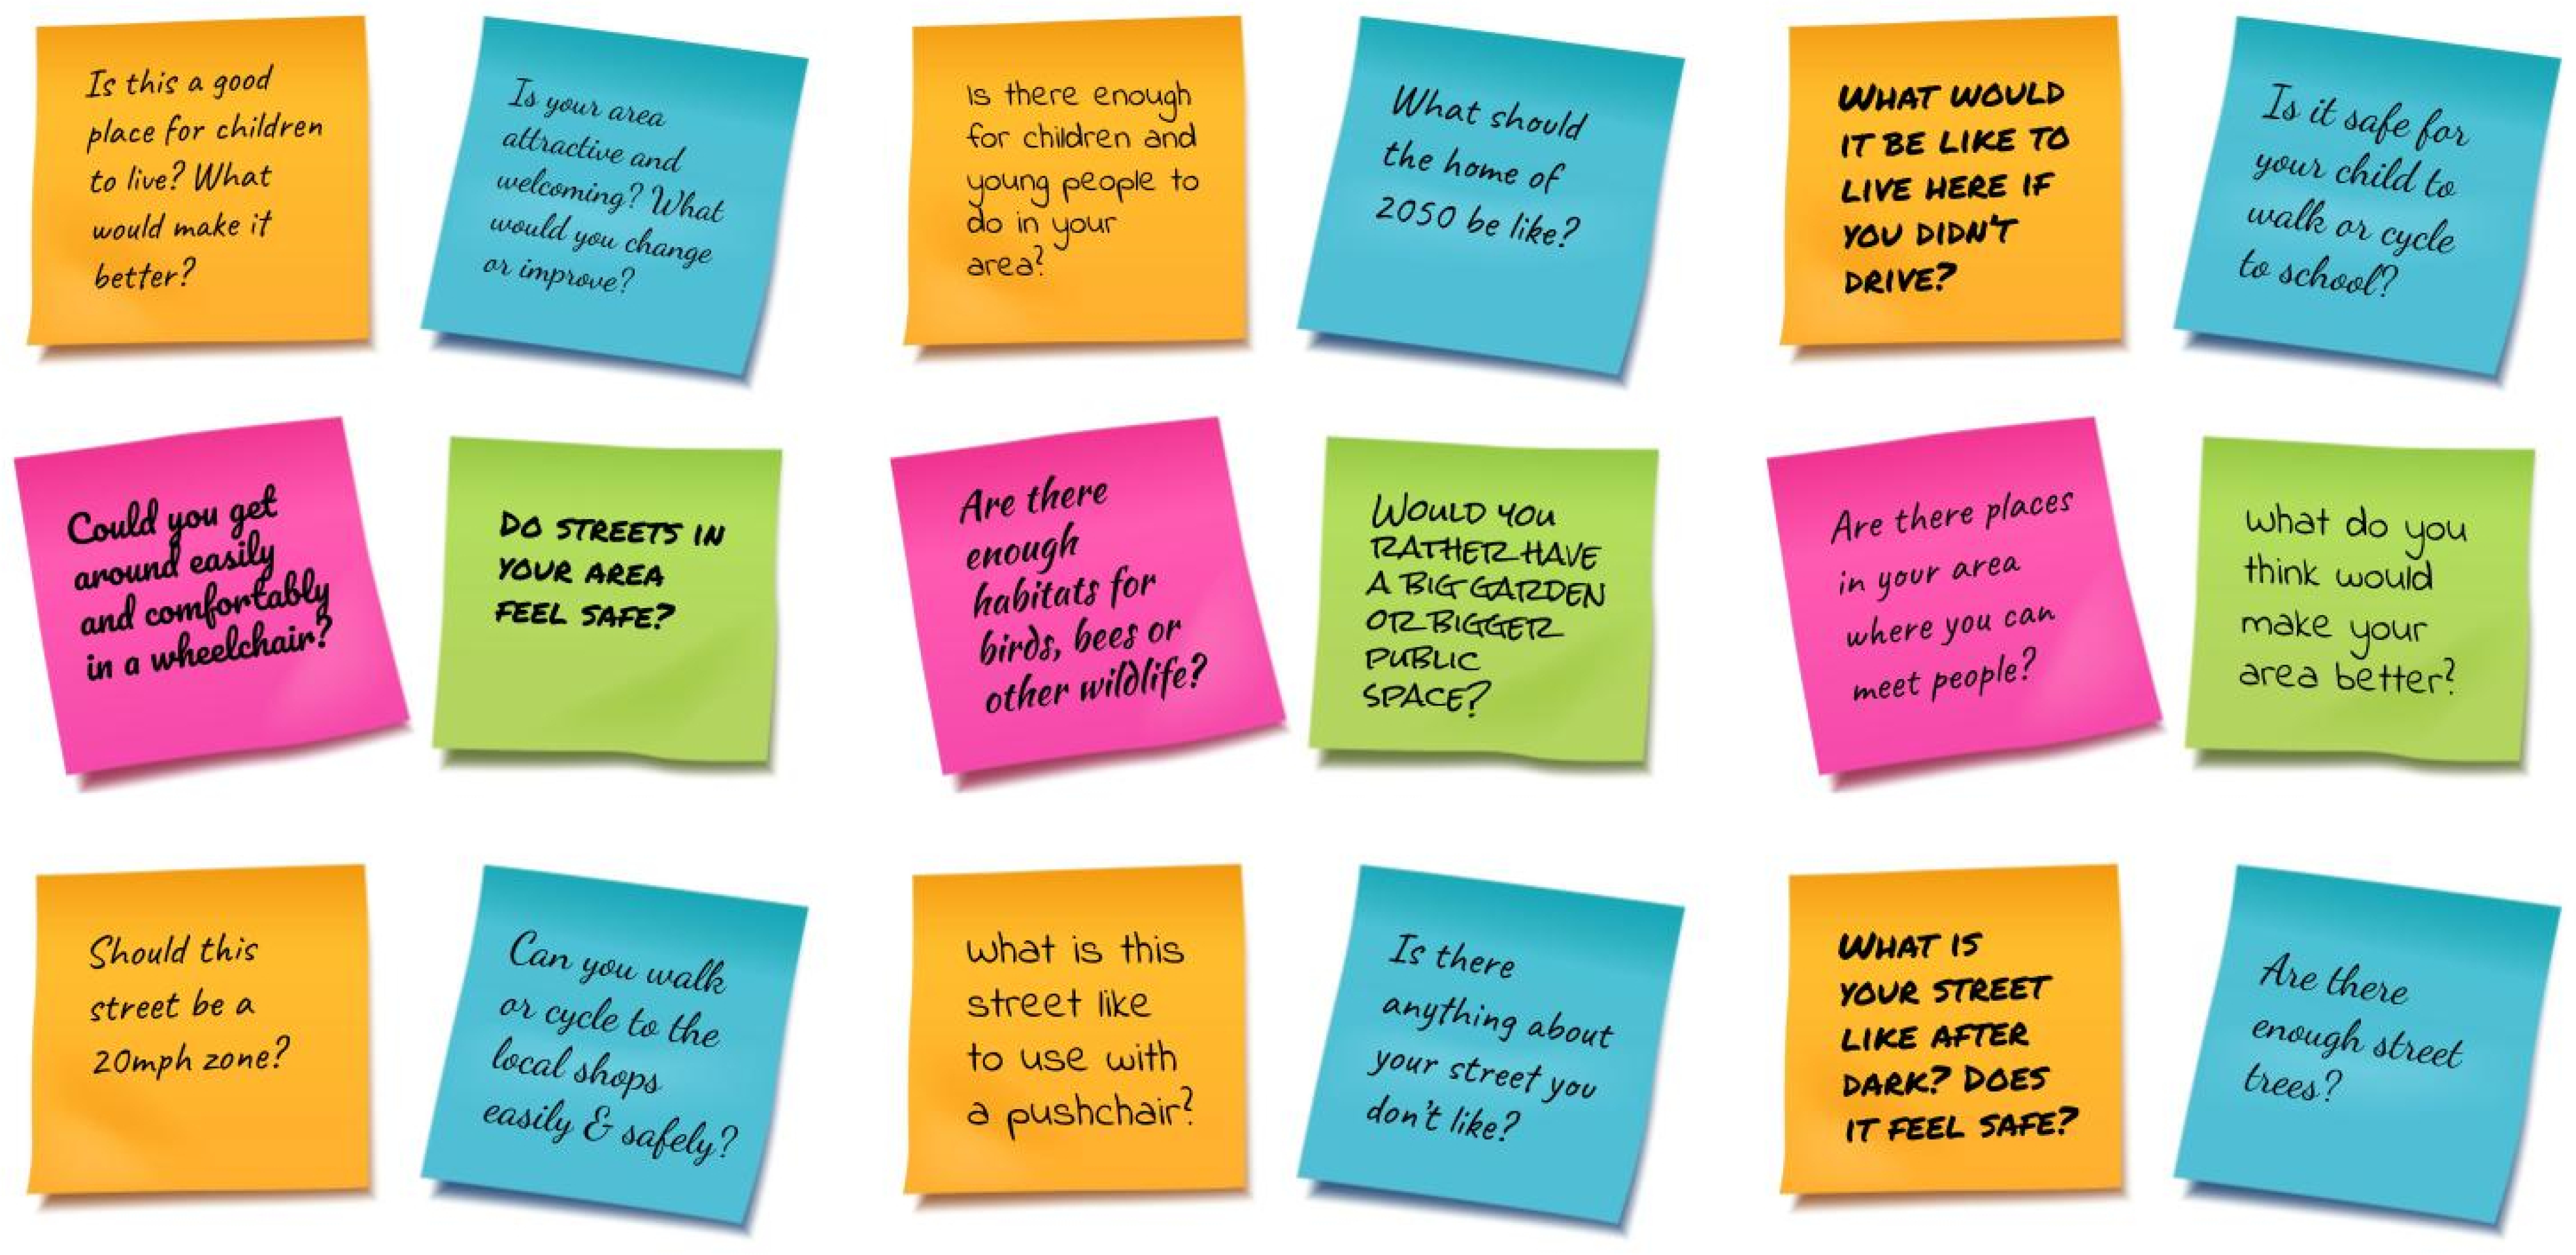 Image showing a series of post-it notes with messages